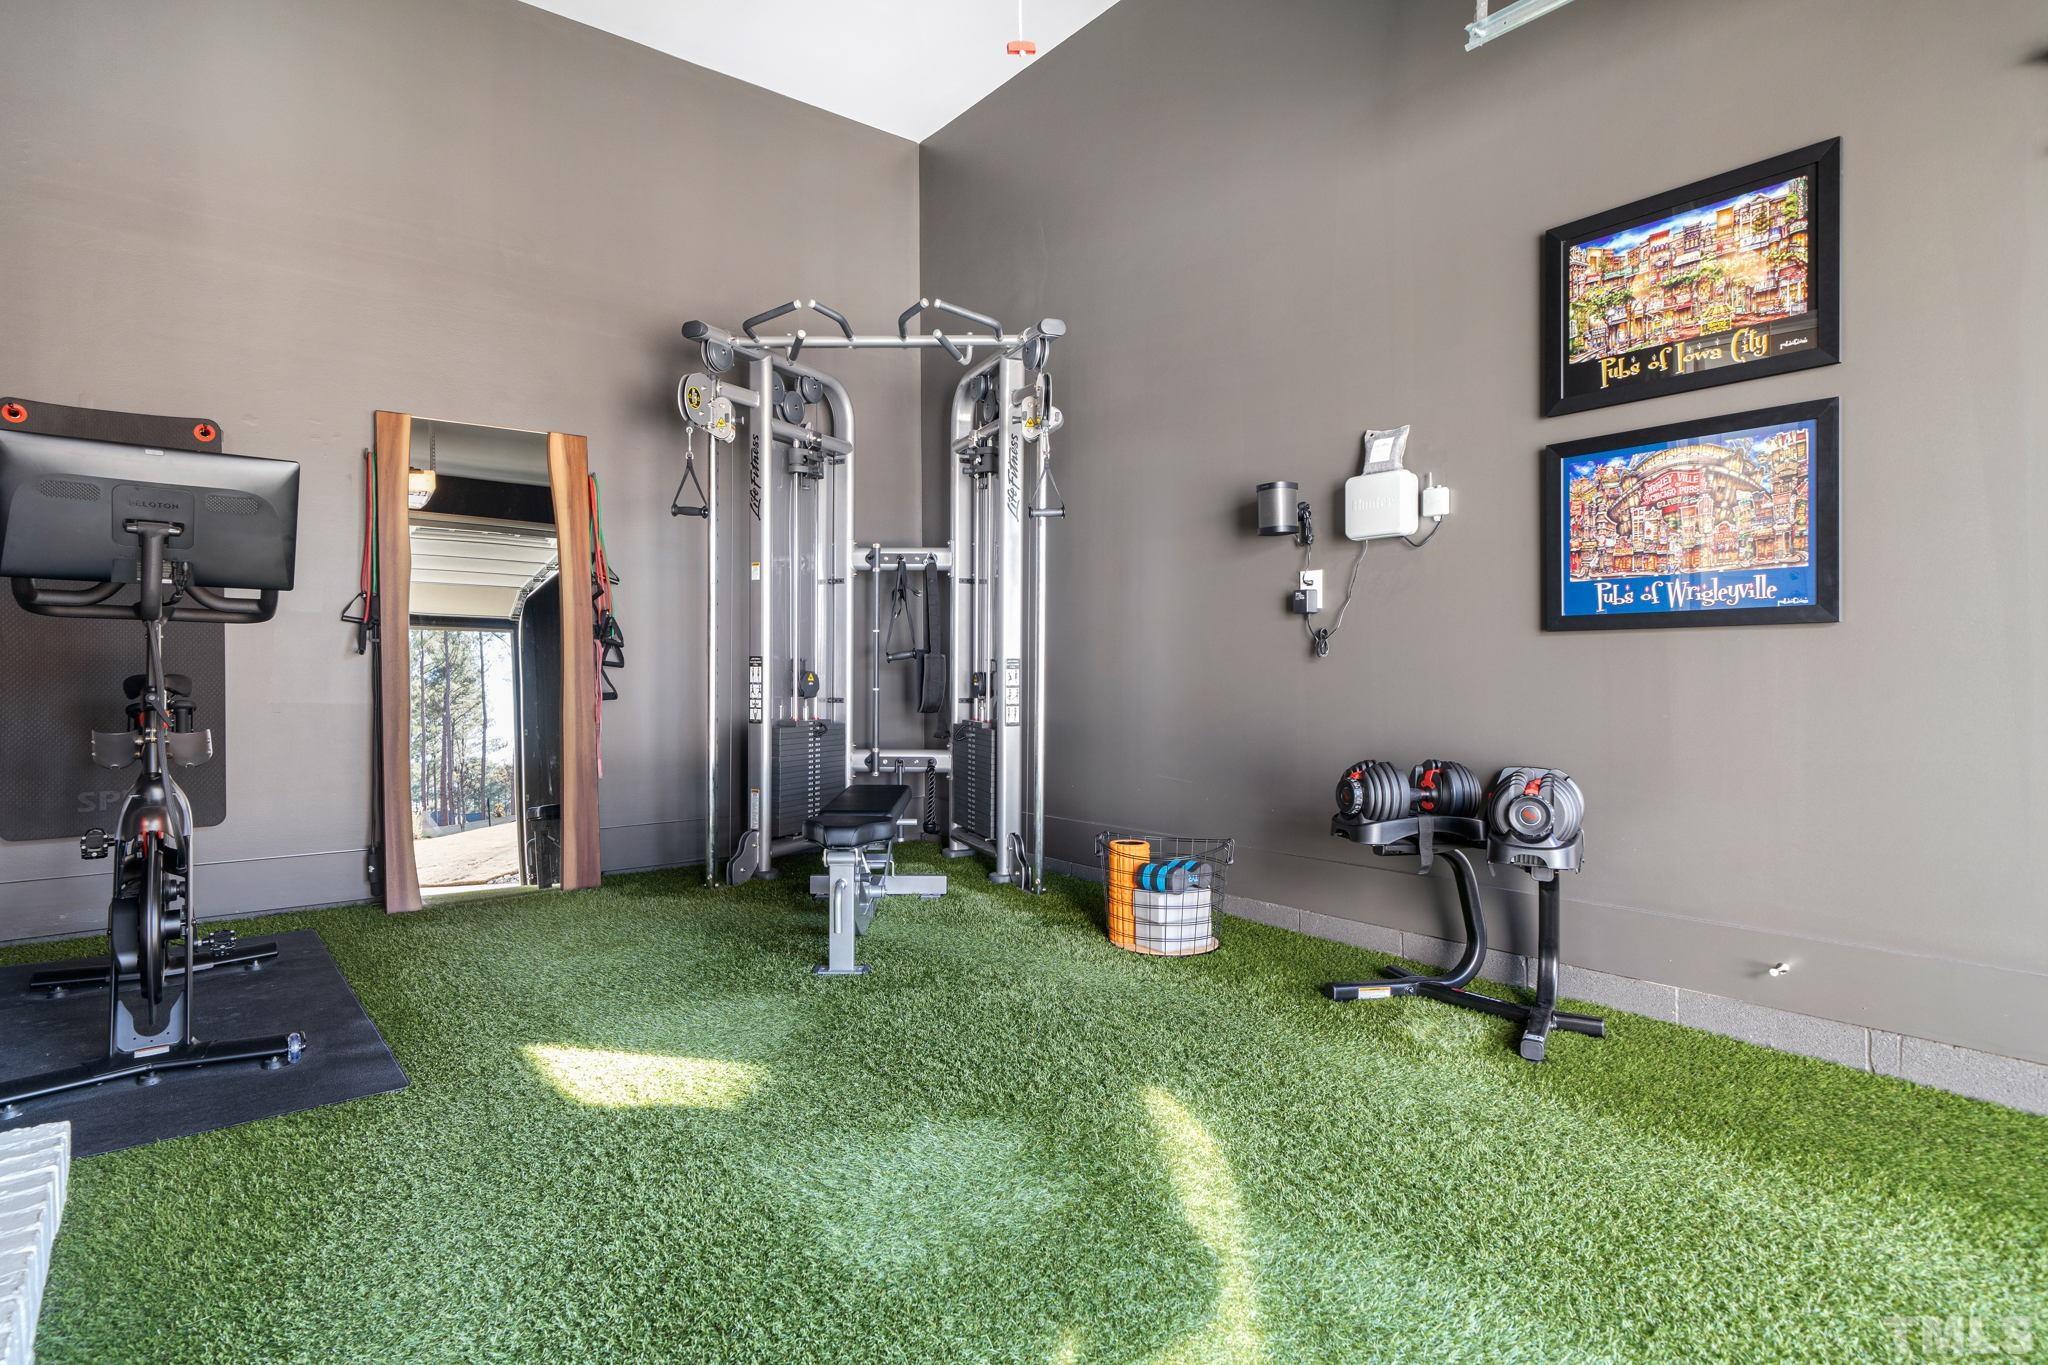 Homeowners have turned the 3rd car garage into a well equipped home gym.